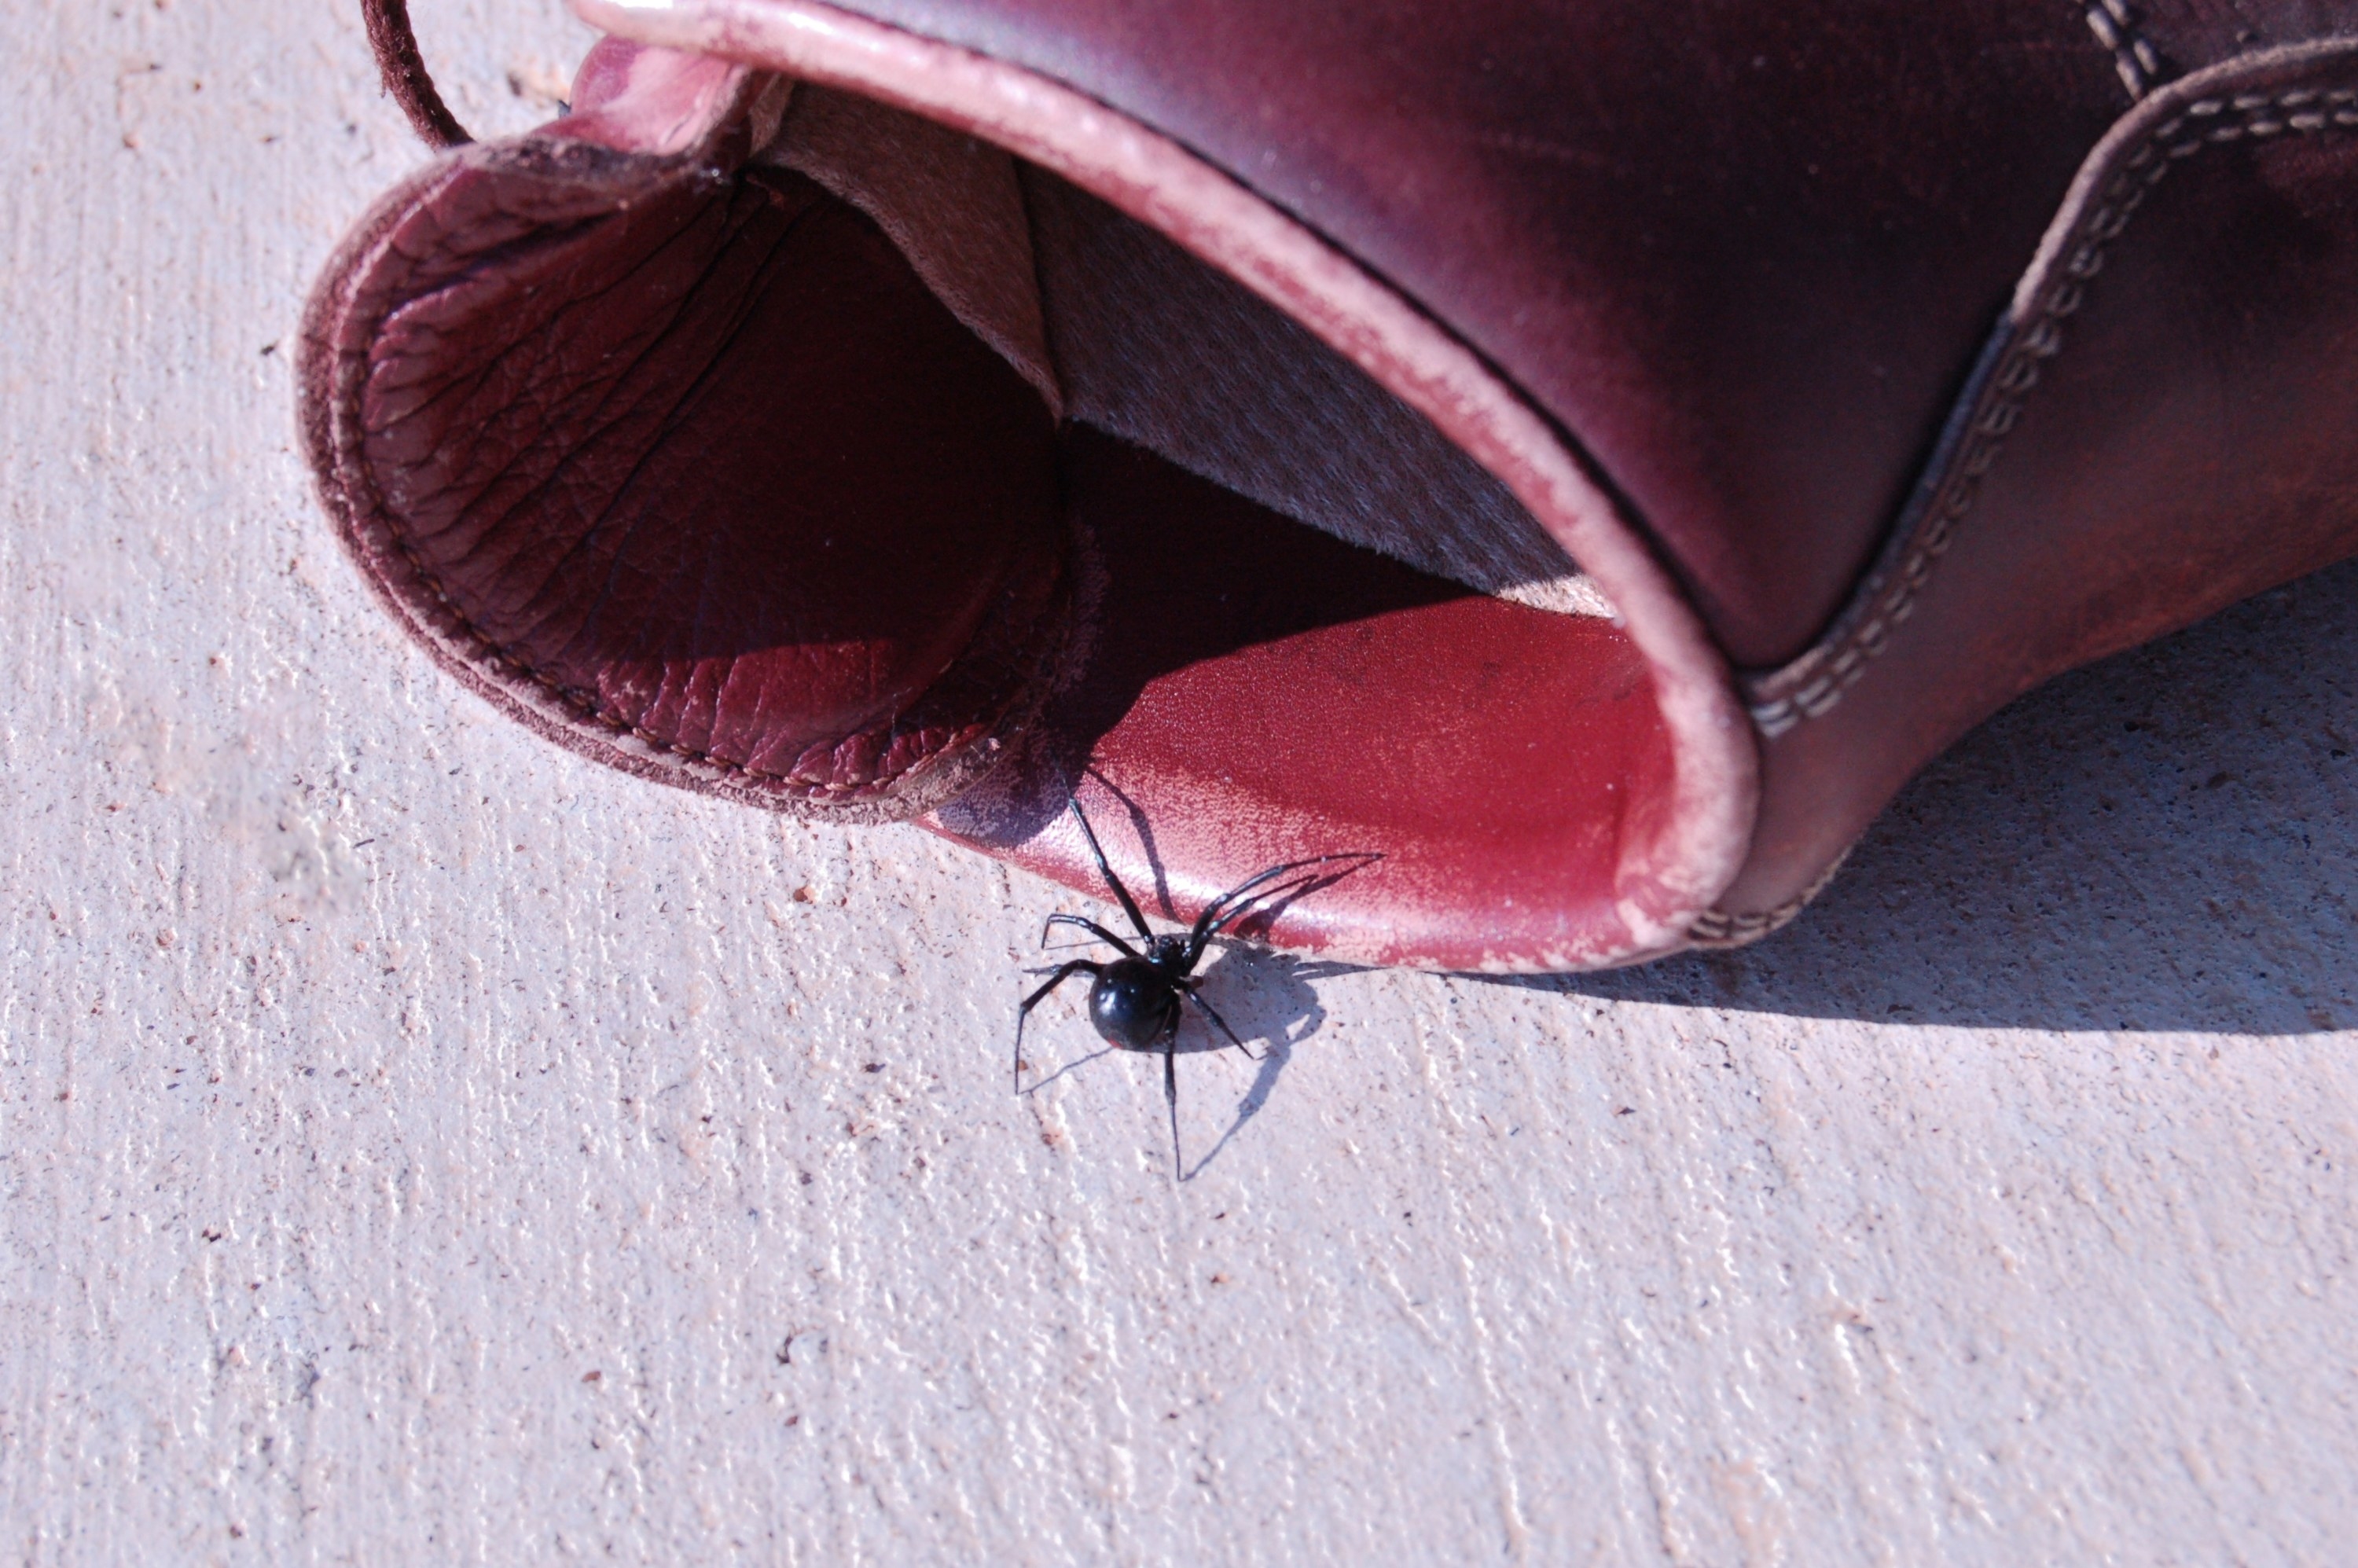 Big black spider crawling towards the opening of a work boot